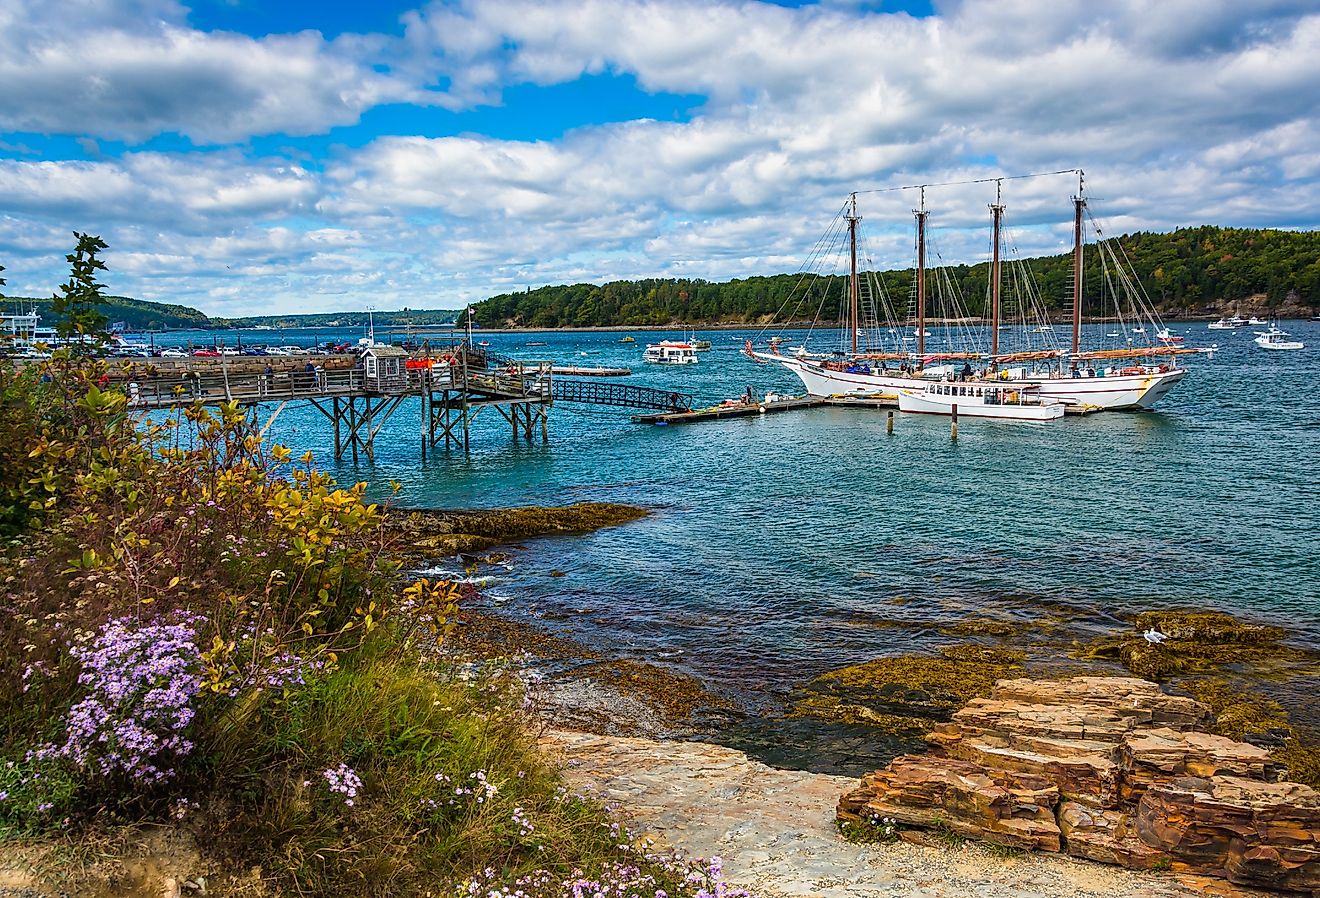 Rocky coast with pretty pink flowers blooming and boats in the harbor at Bar Harbor, Maine.